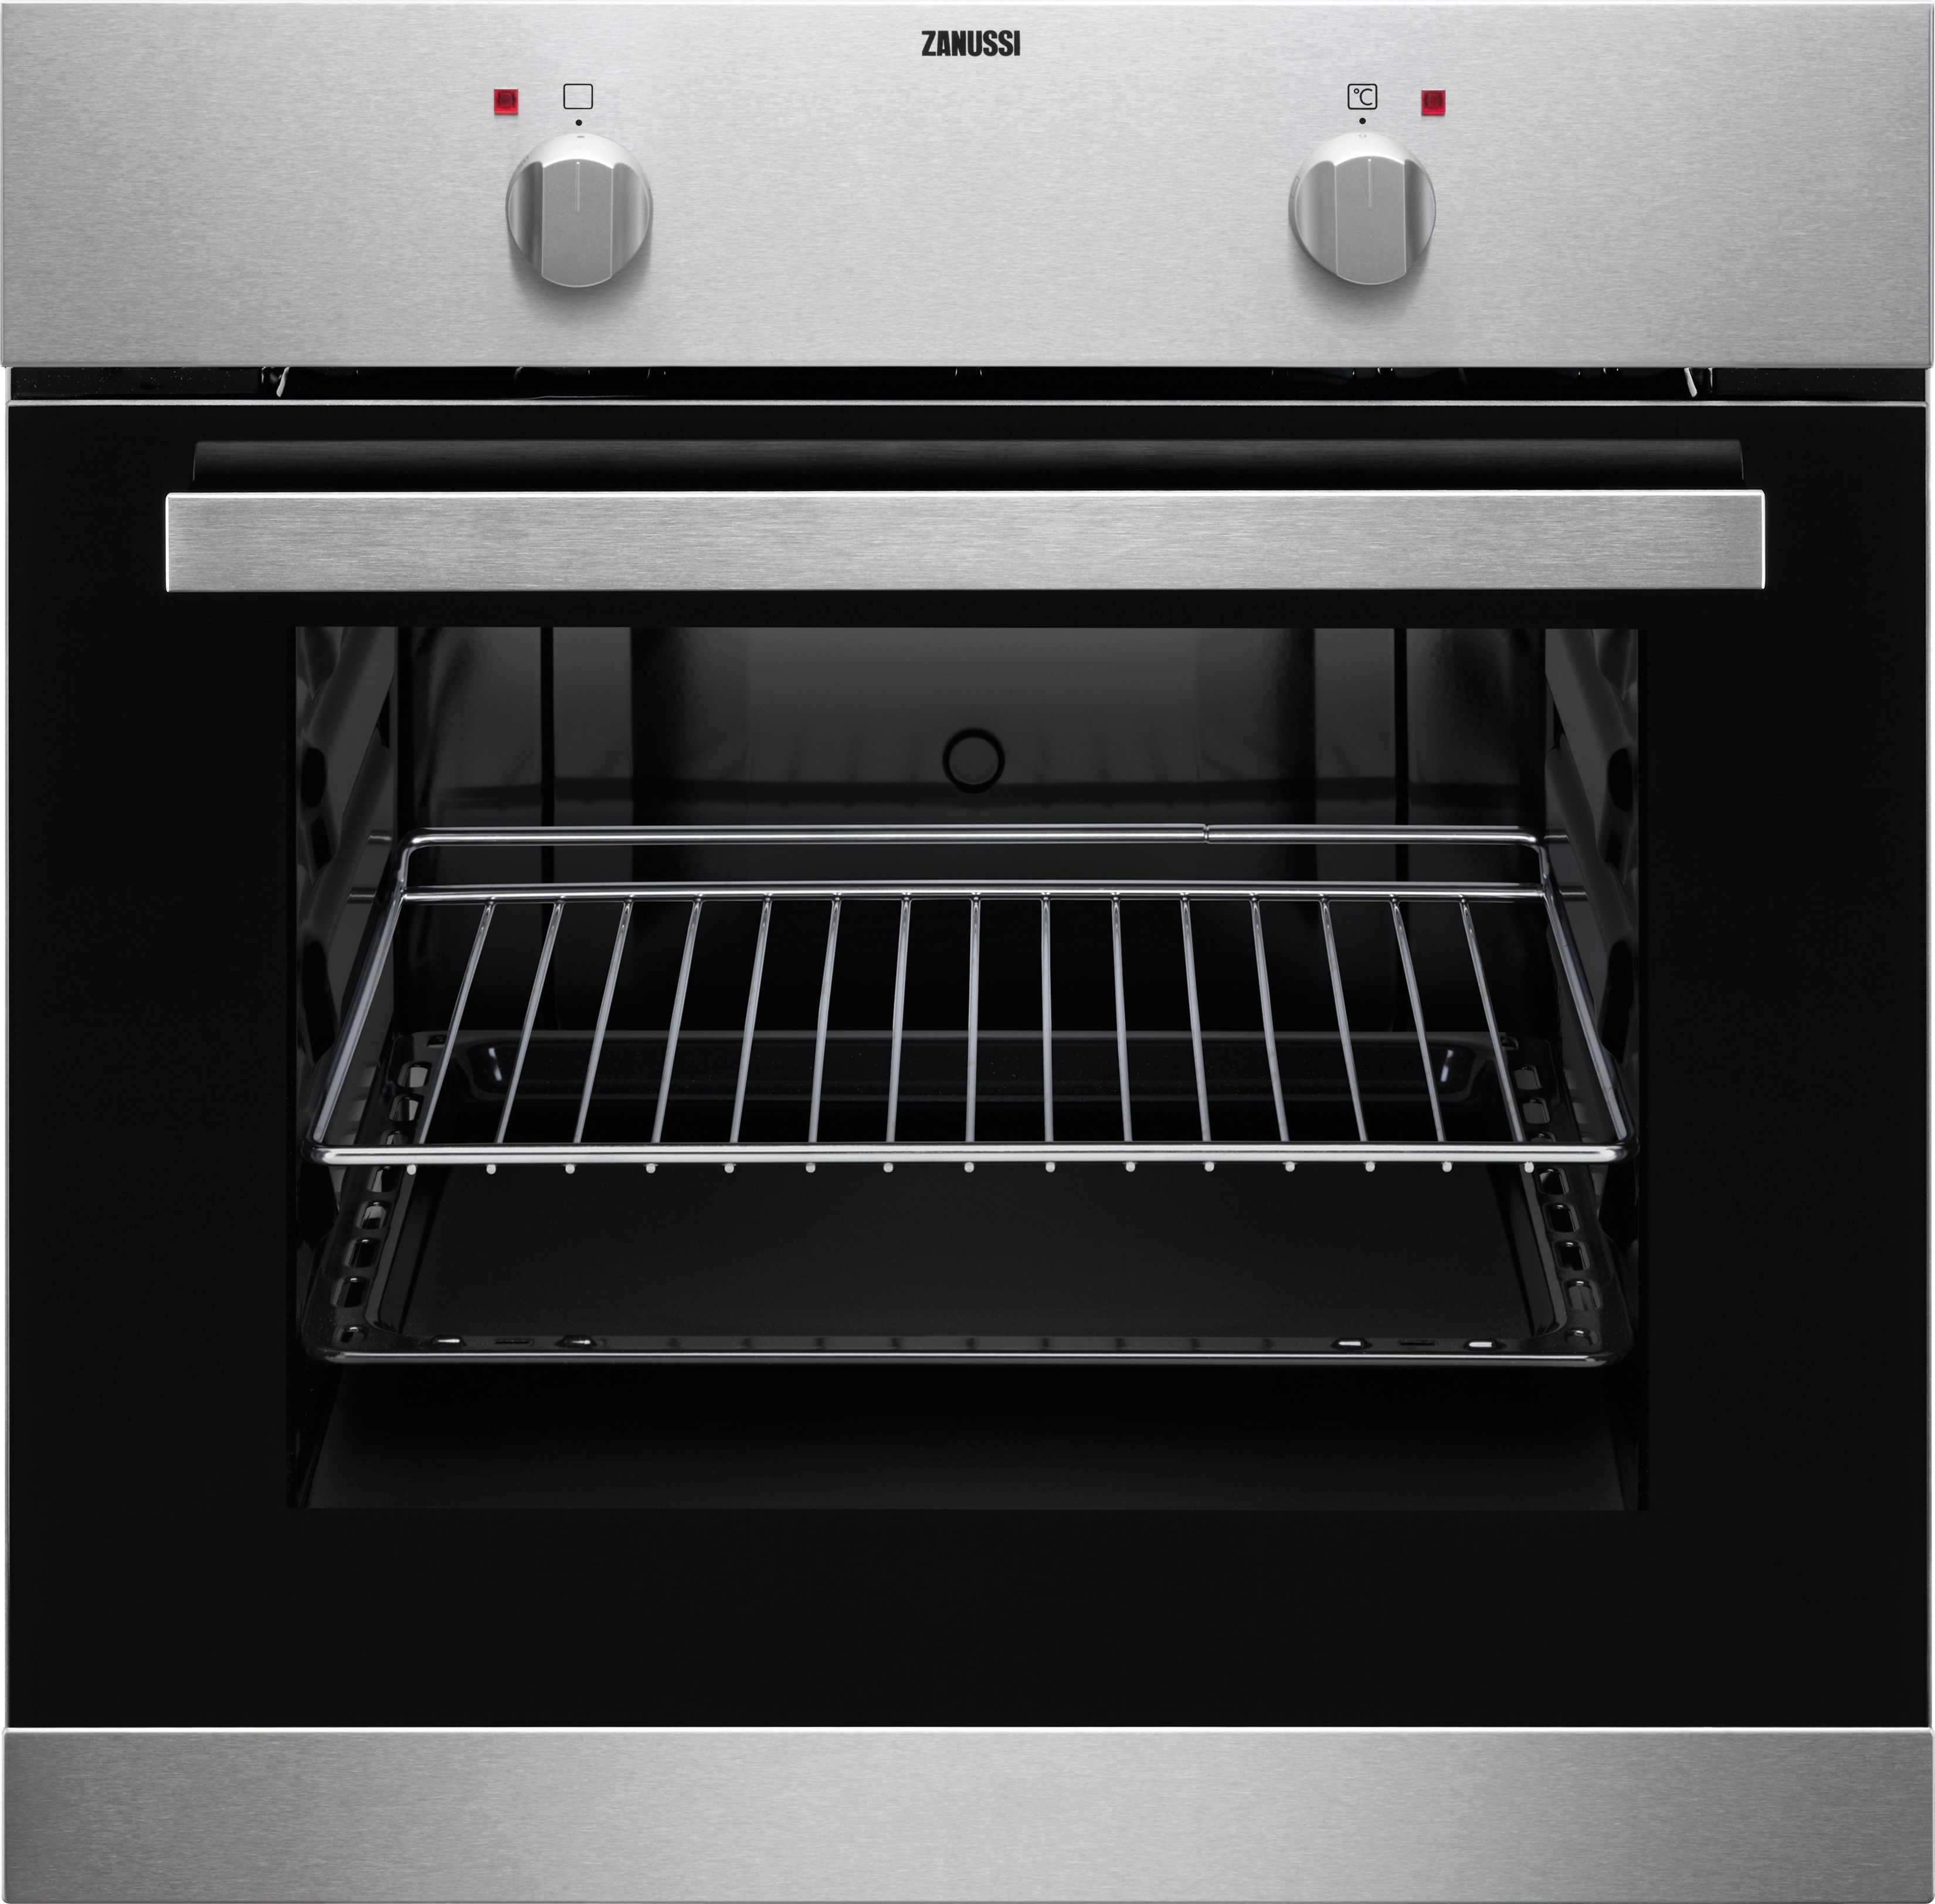 Zanussi Conventional Single Oven with Grill ZOB10501XA